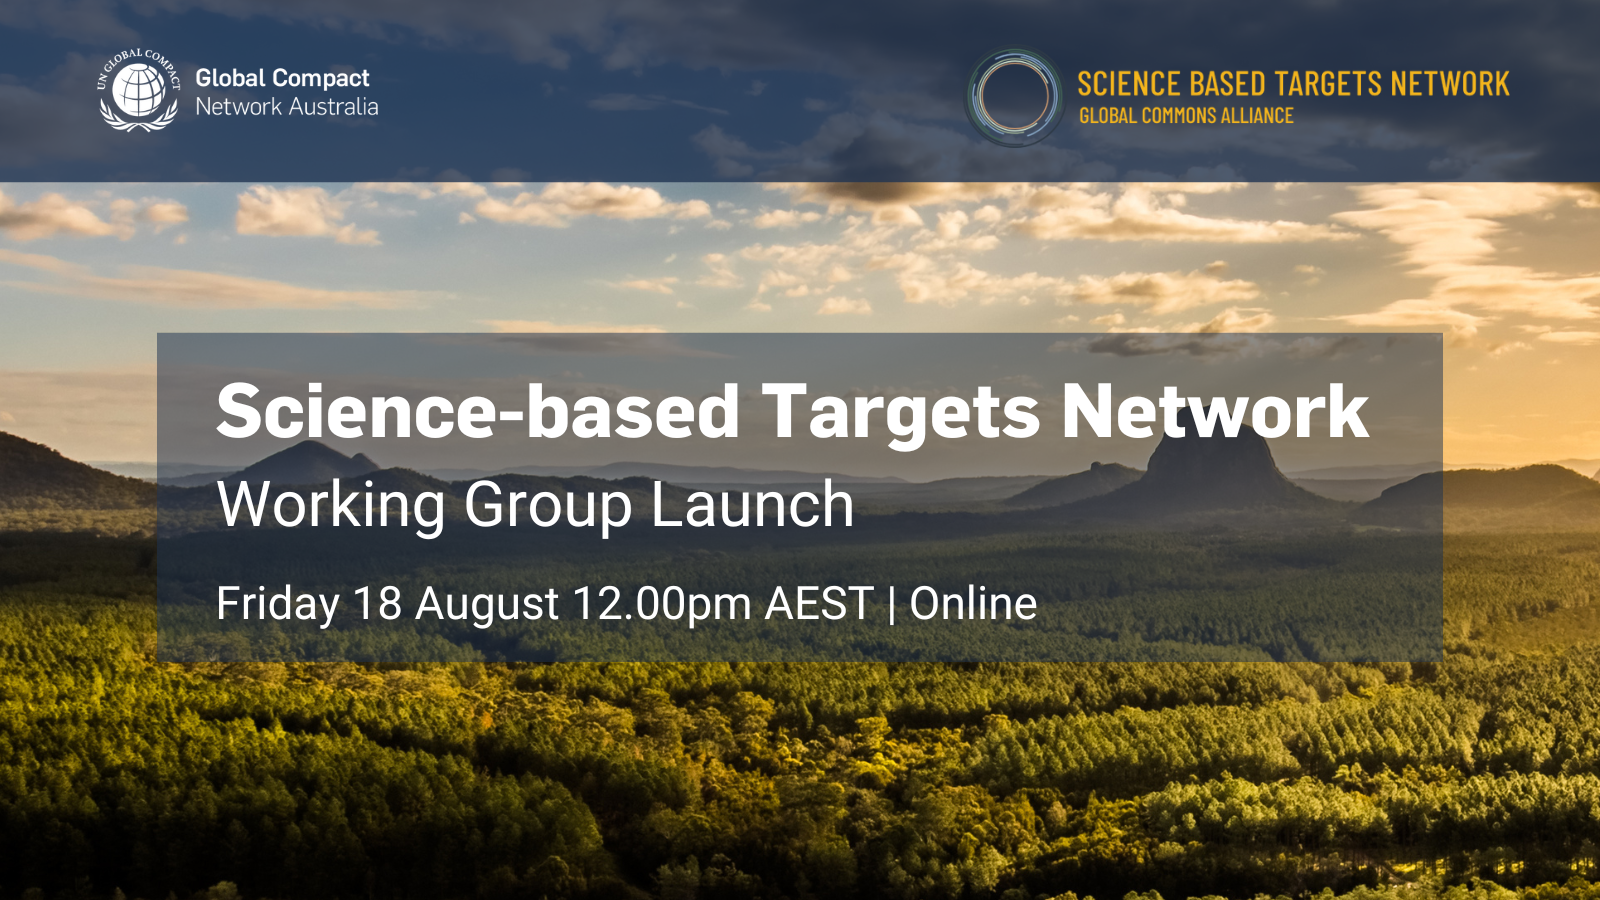 Scienced-based Targets Network Working Group Launch